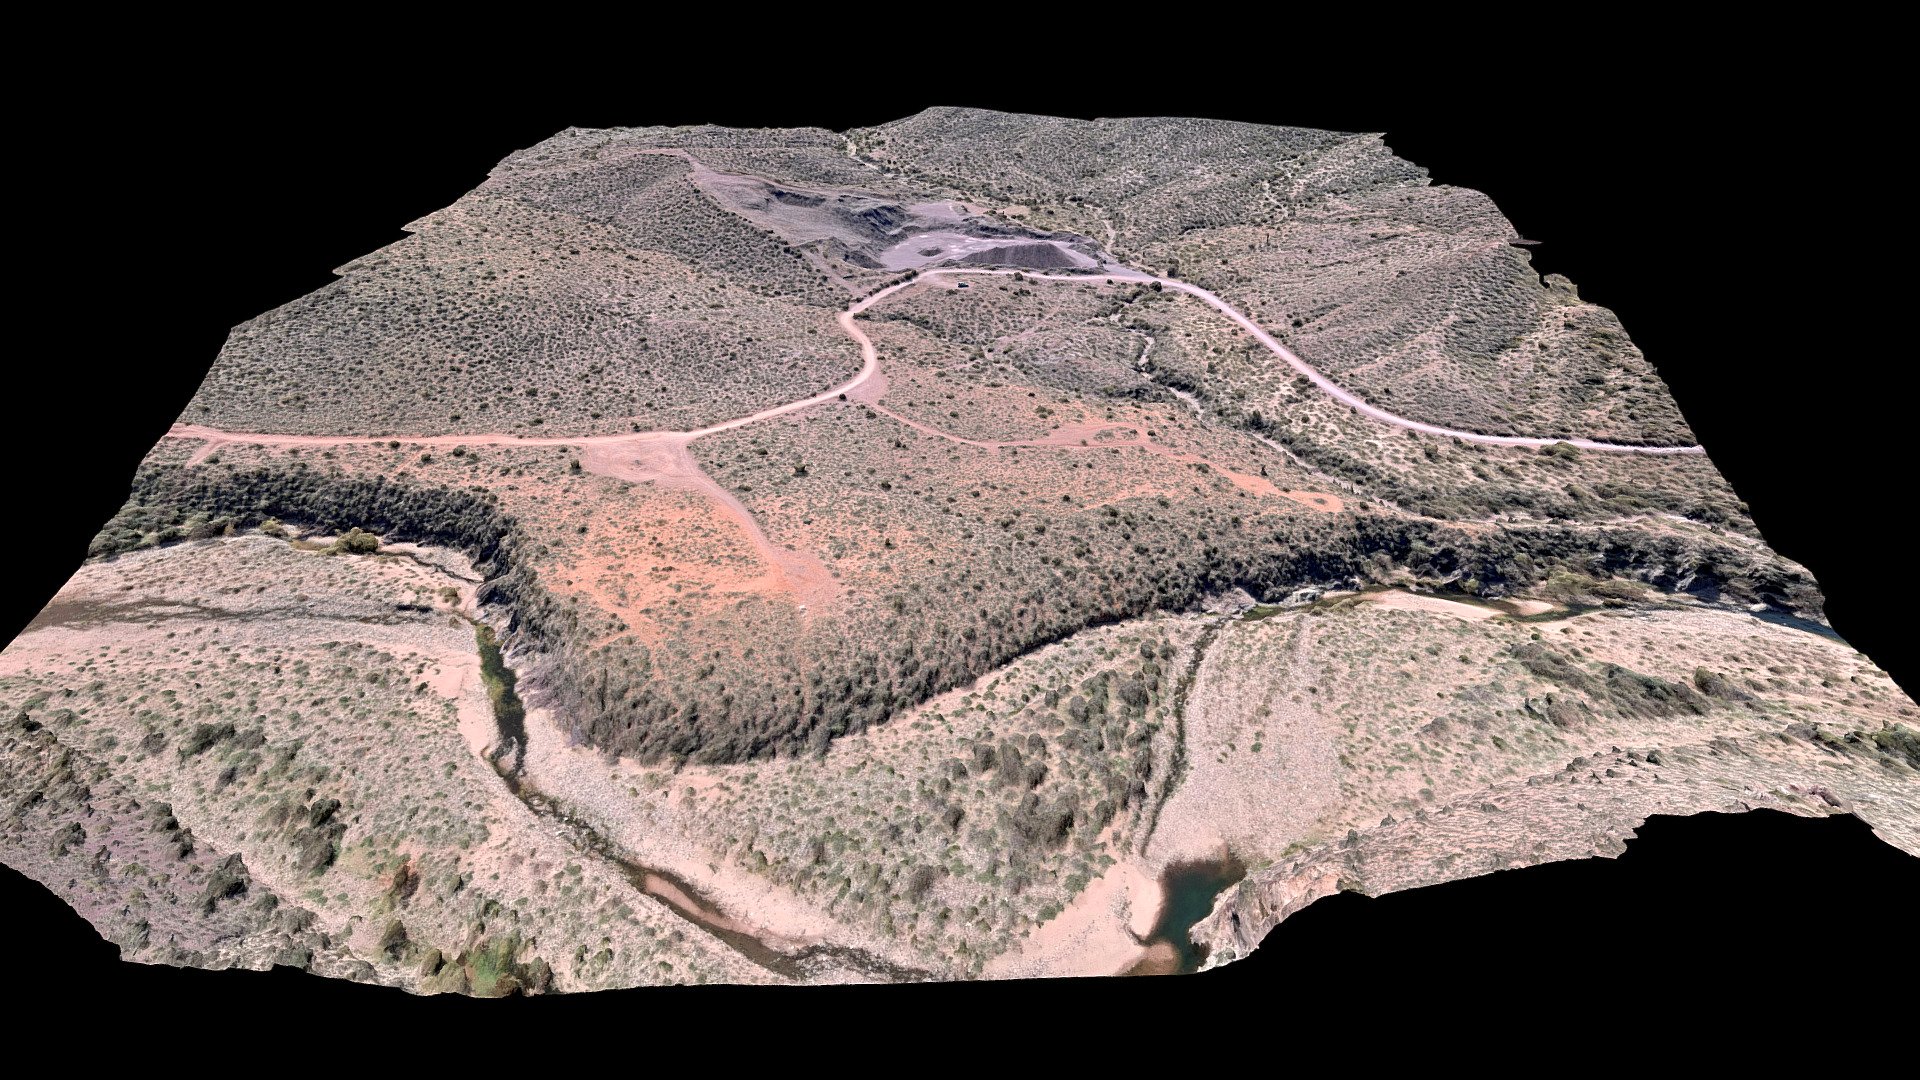 I captured and processed this model of one of my favorite flight practice areas. Class G airspace, BLM land. Interesting terrain. Drone used was Autel Evo2 Pro 3d model